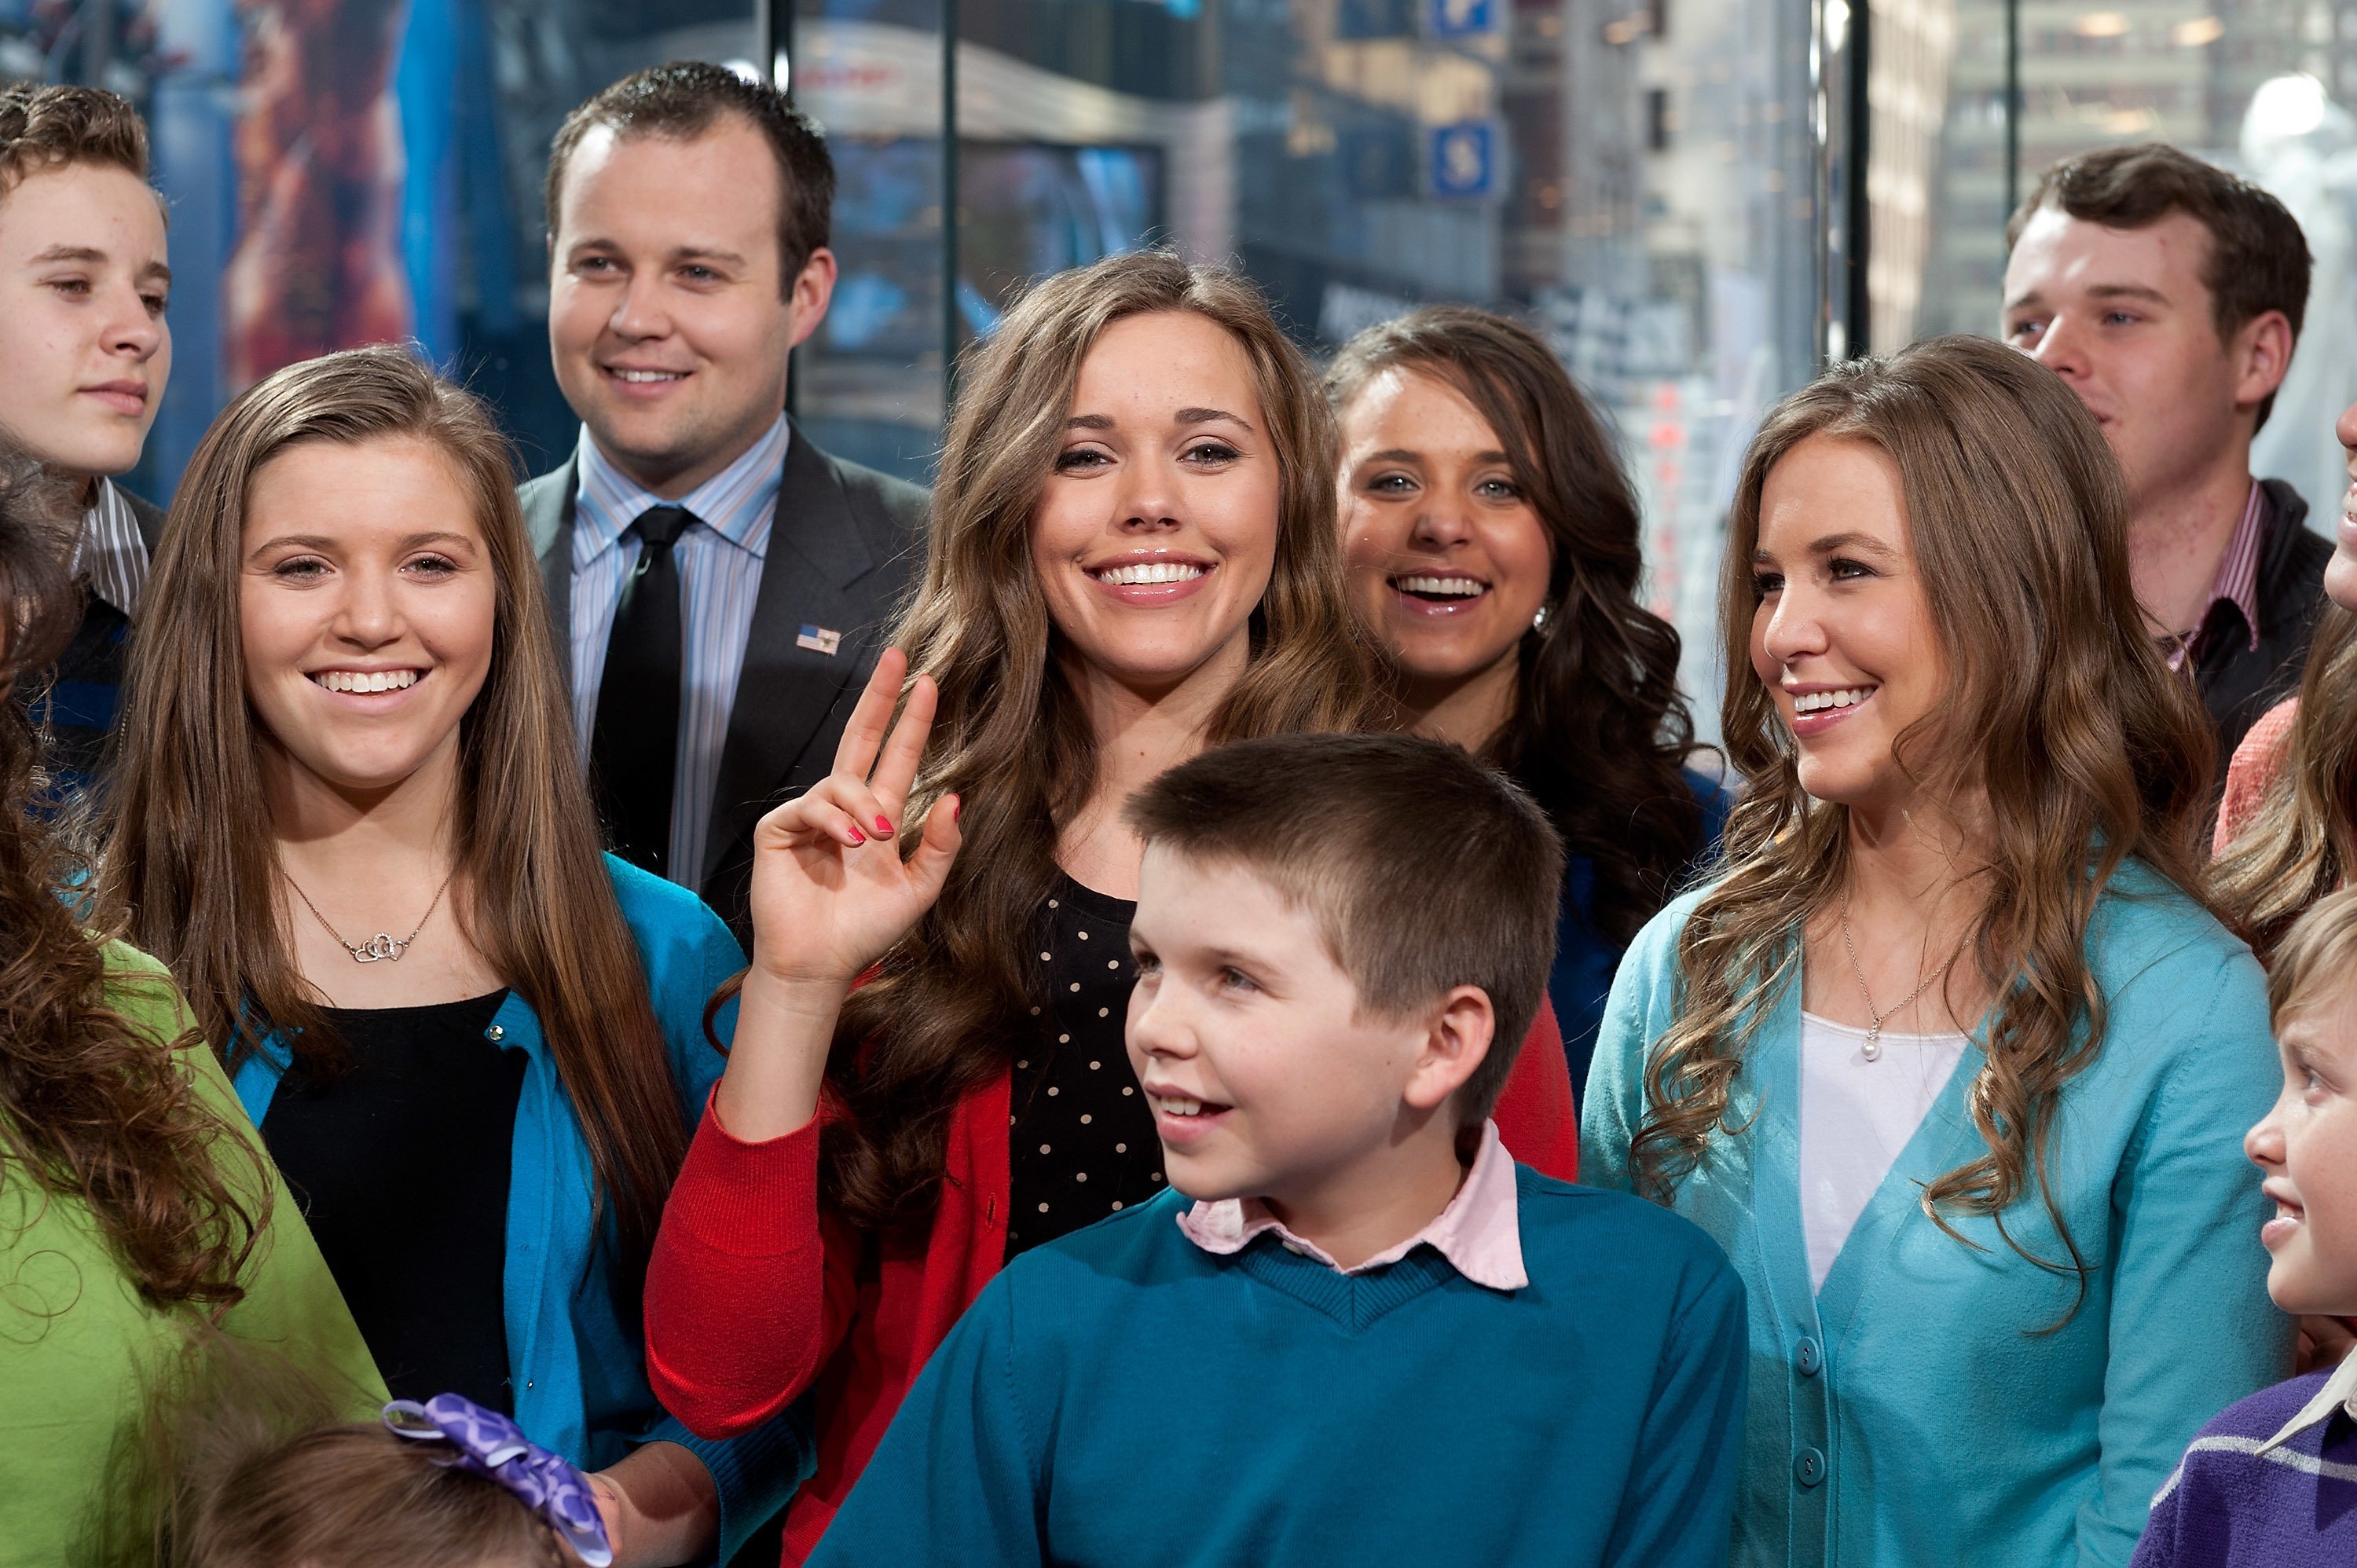 The Duggar family visits "Extra" at their New York studios in Times Square on March 11, 2014, in New York City | Photo: D Dipasupil/Getty Images